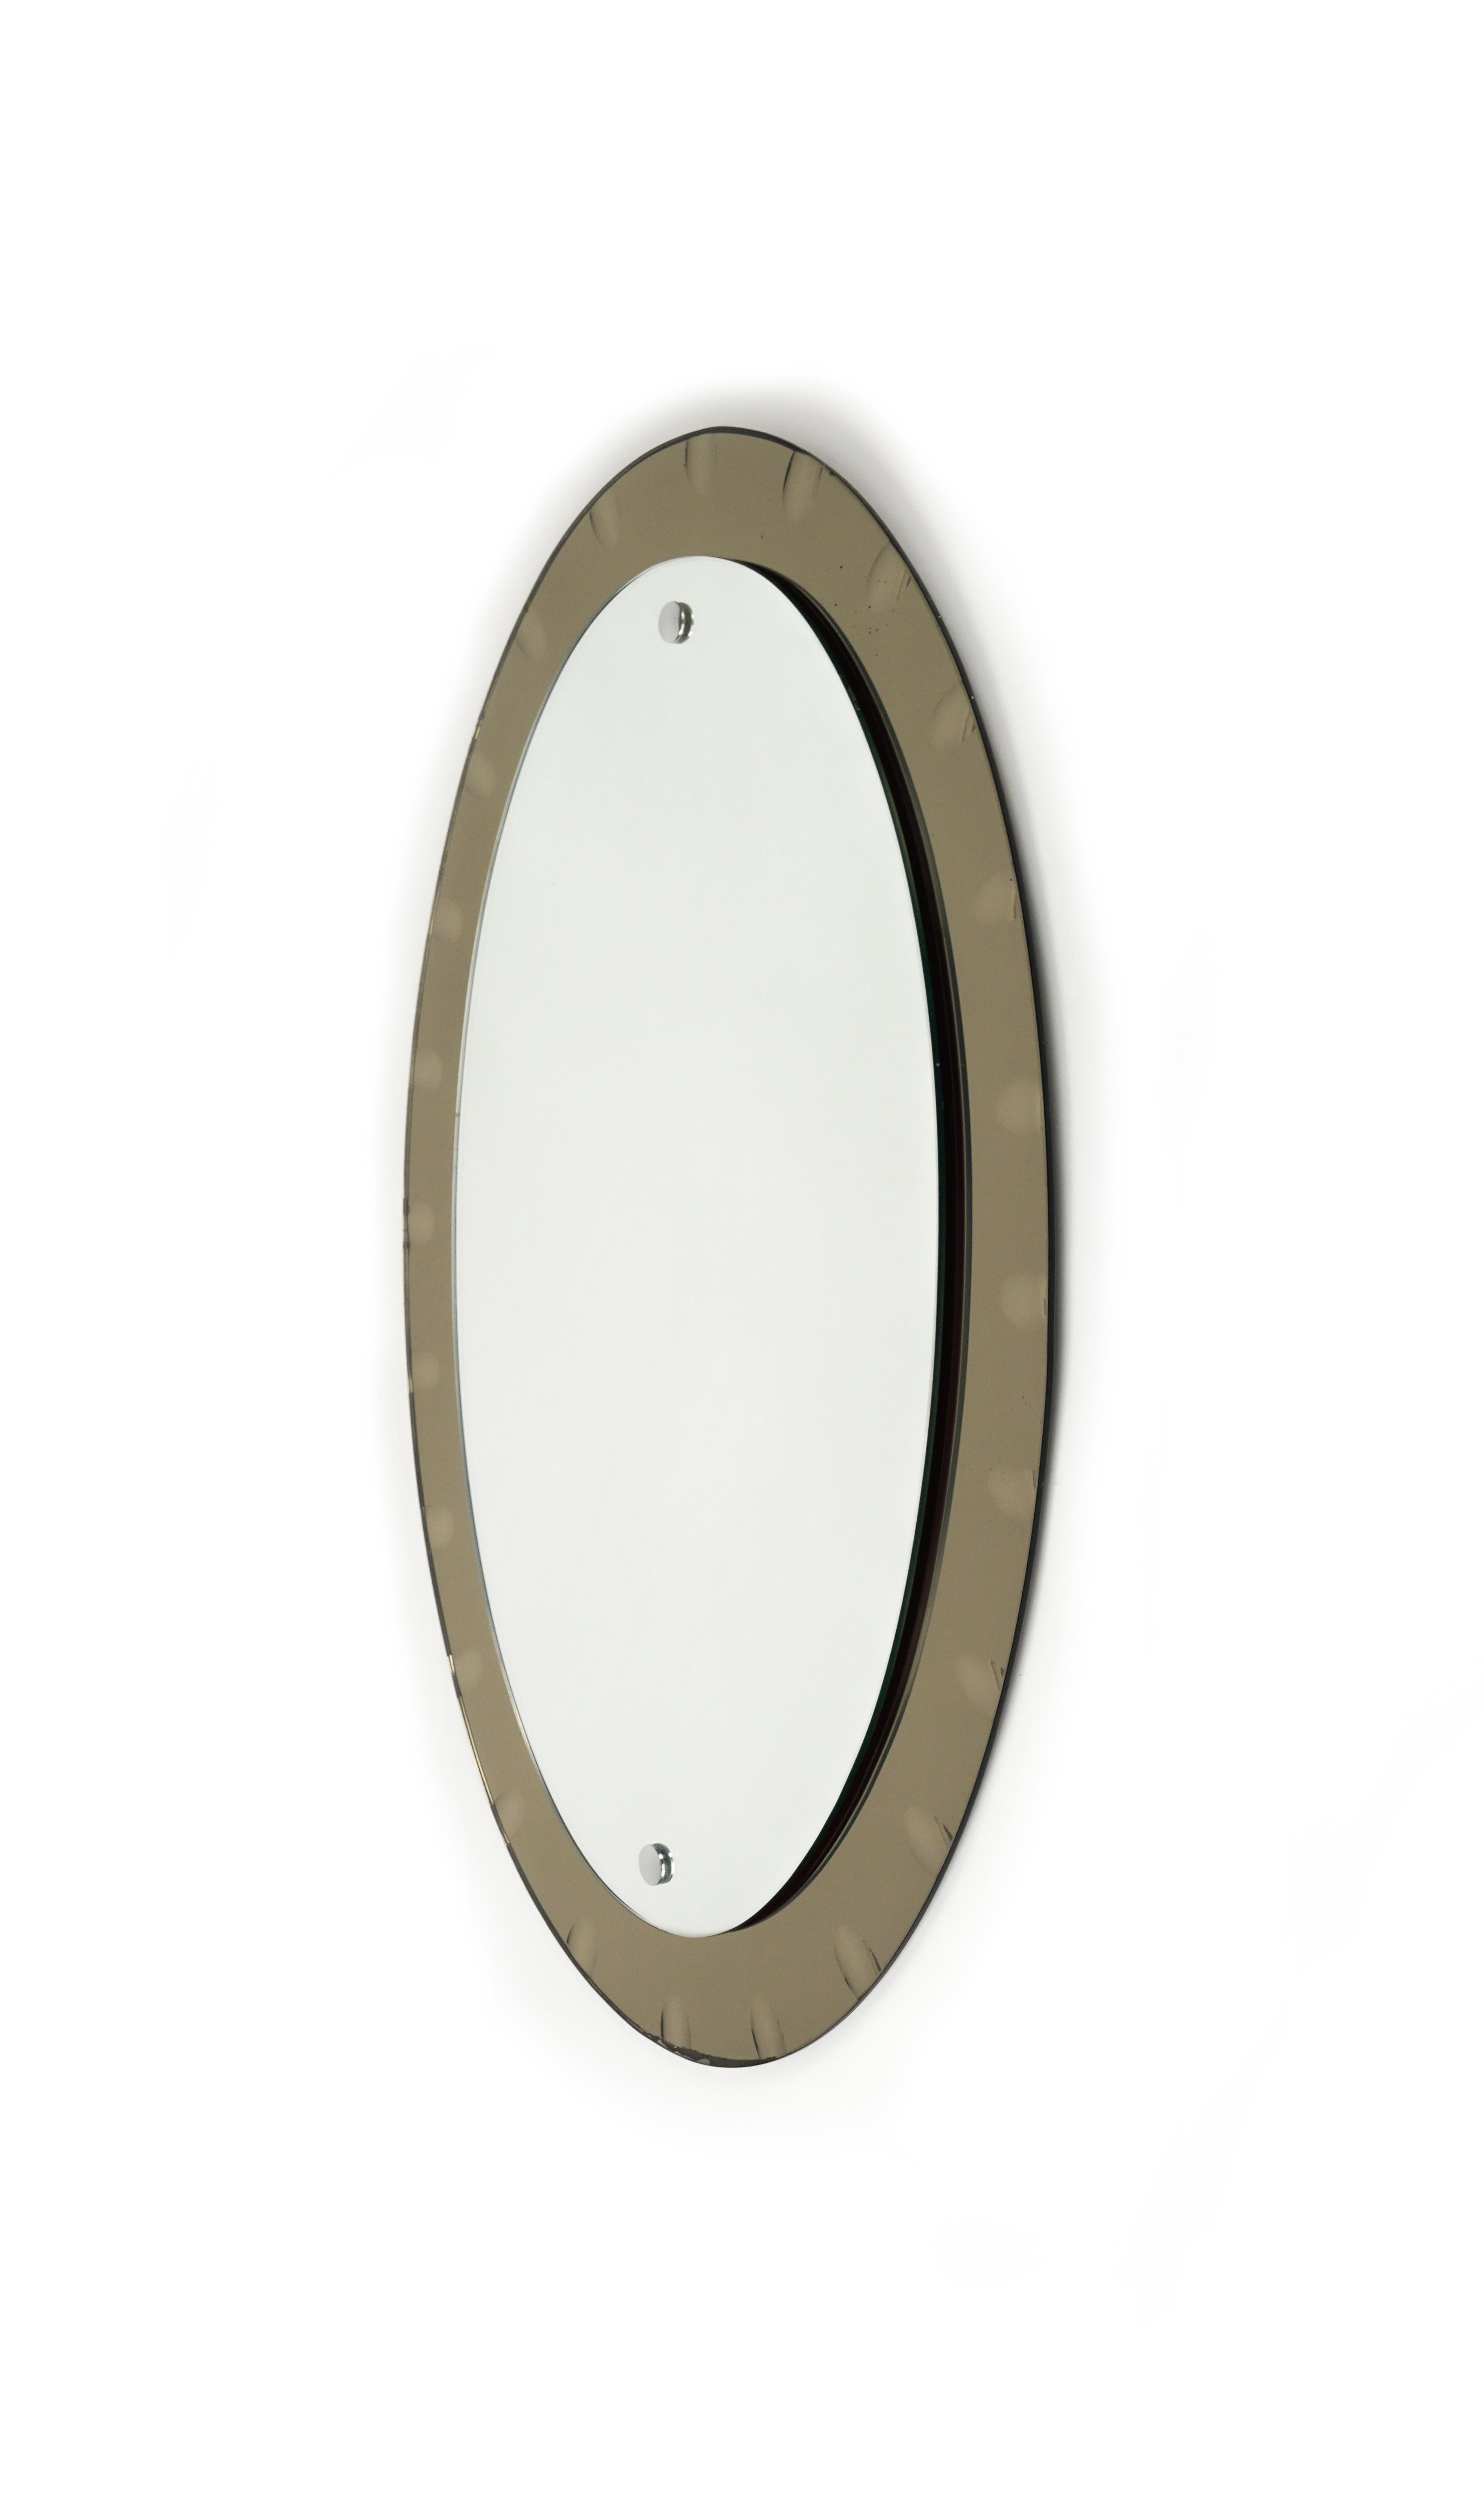 Midcentury amazing oval mirror the production of which can be attributed to Cristal Arte. 

Made in Italy in the 1960s.

The mirror has an oval shape and consists of two 5mm planes each. The mirror is anchored to a frame of the same shape, but